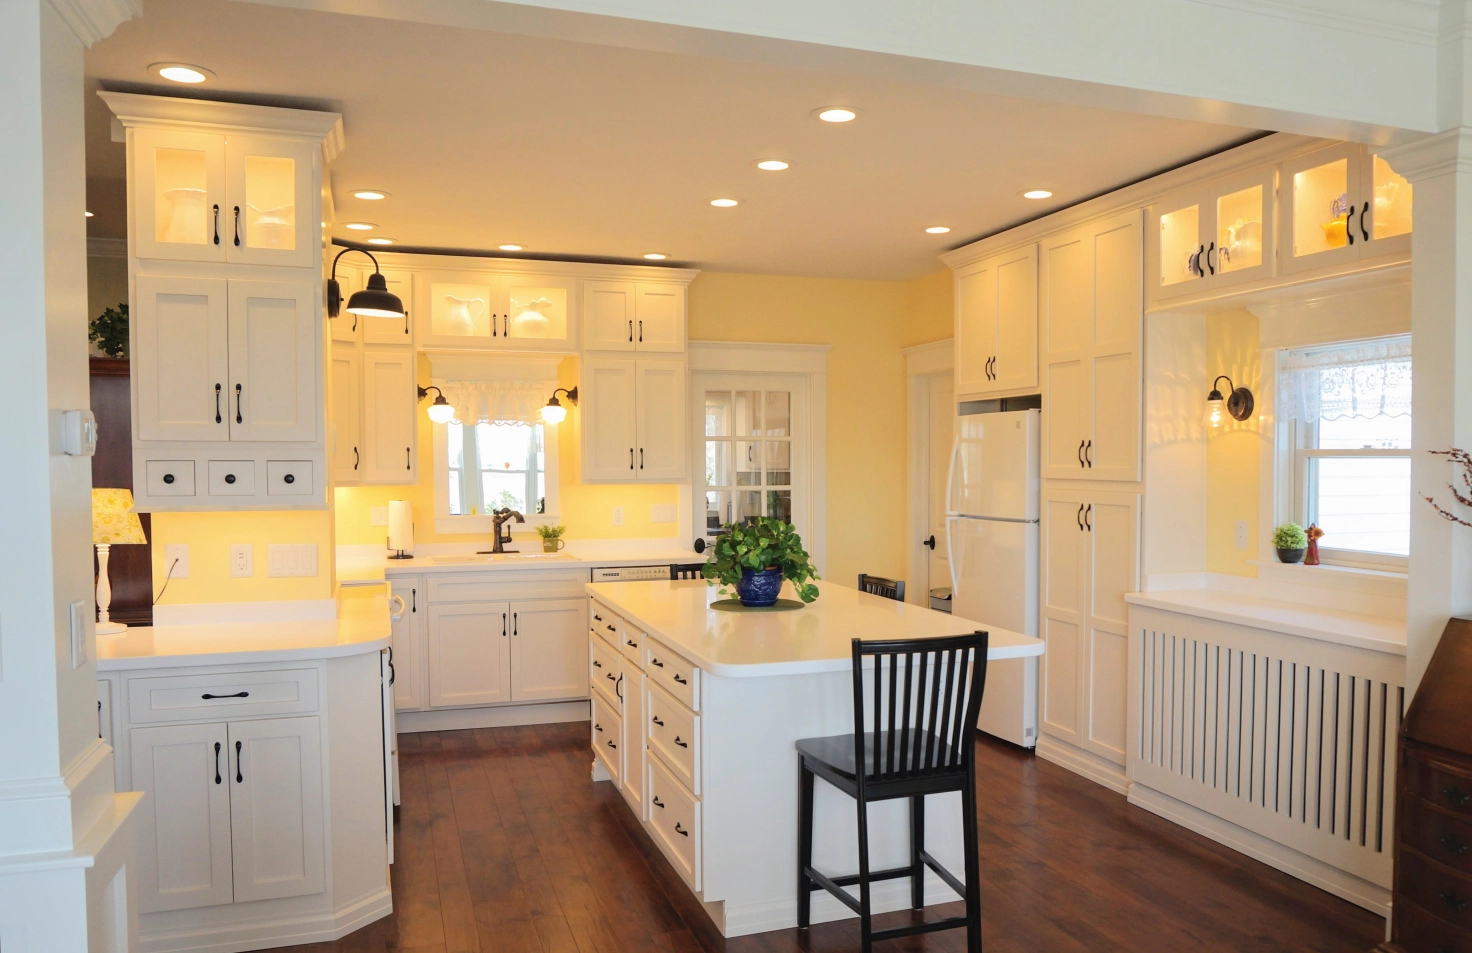 A very white kitchen with white cabinetry, white walls, white appliances, and a white ceiling.